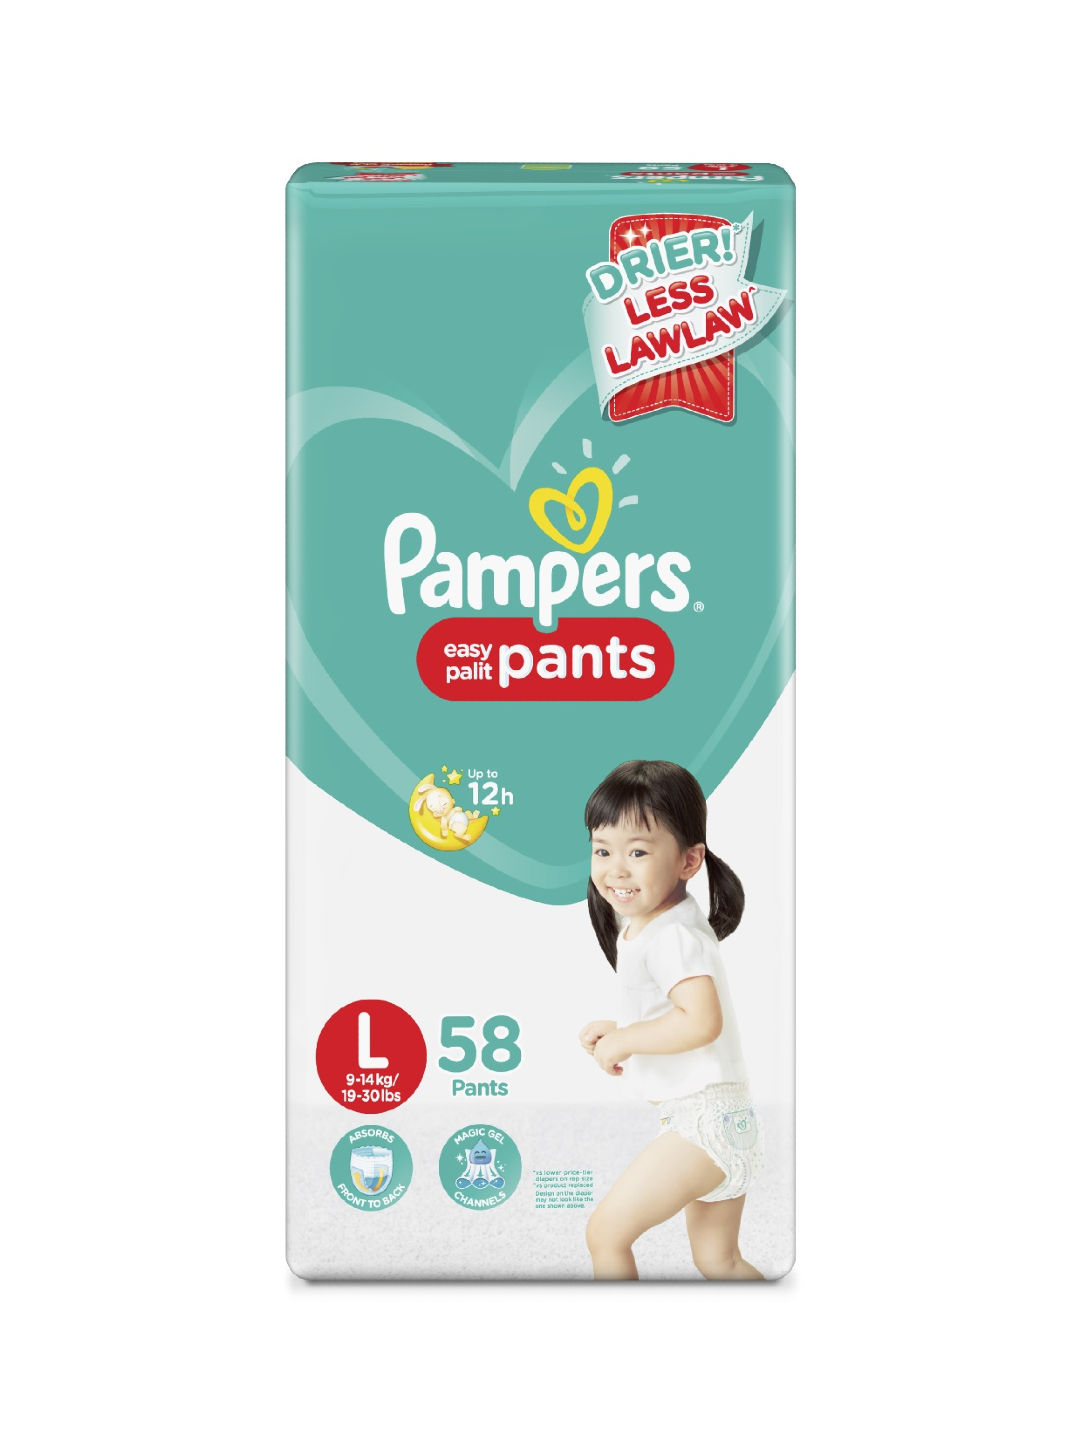 Buy Pampers Pants Diapers Extra Large Size 6 44 Count Online in Pakistan-  Medonline.pk